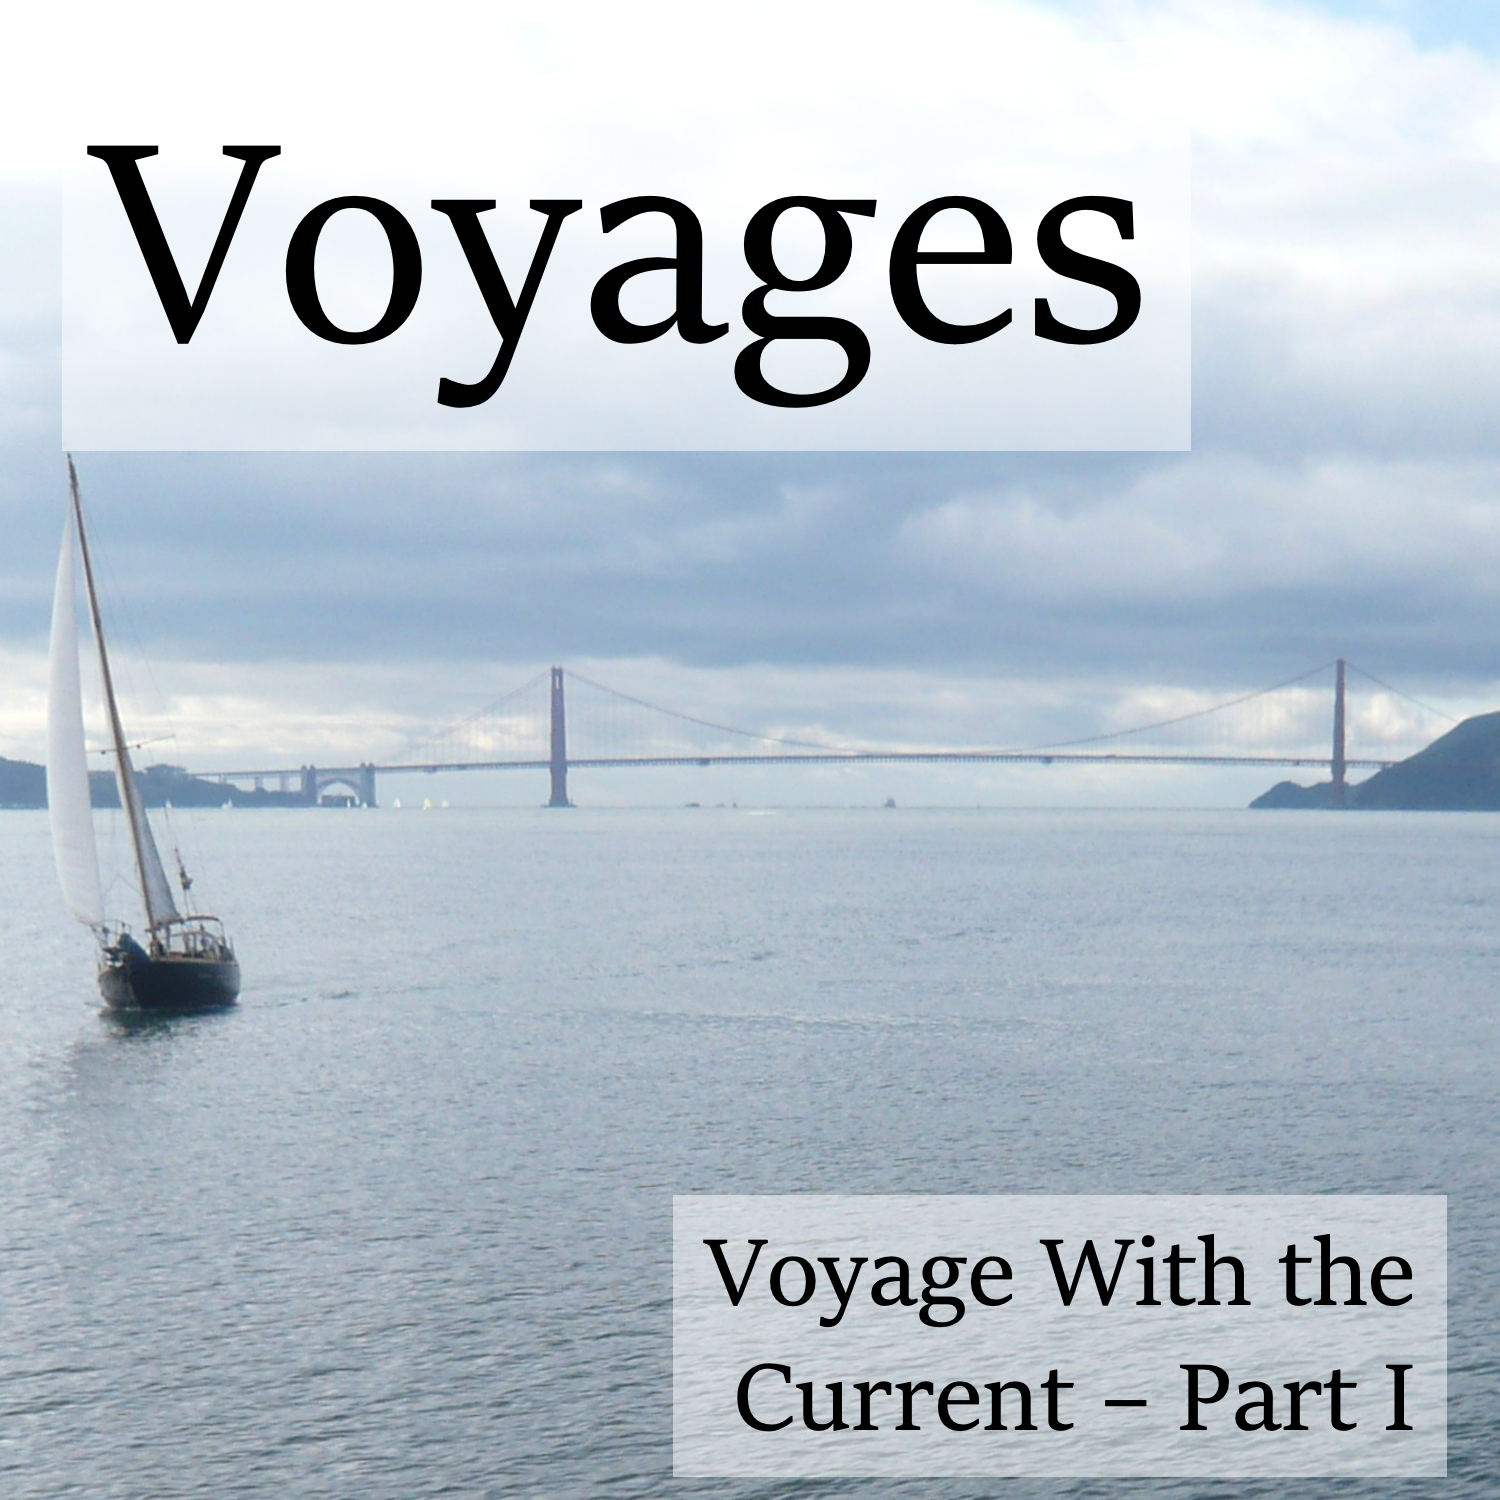 Voyage With the Current - Part I